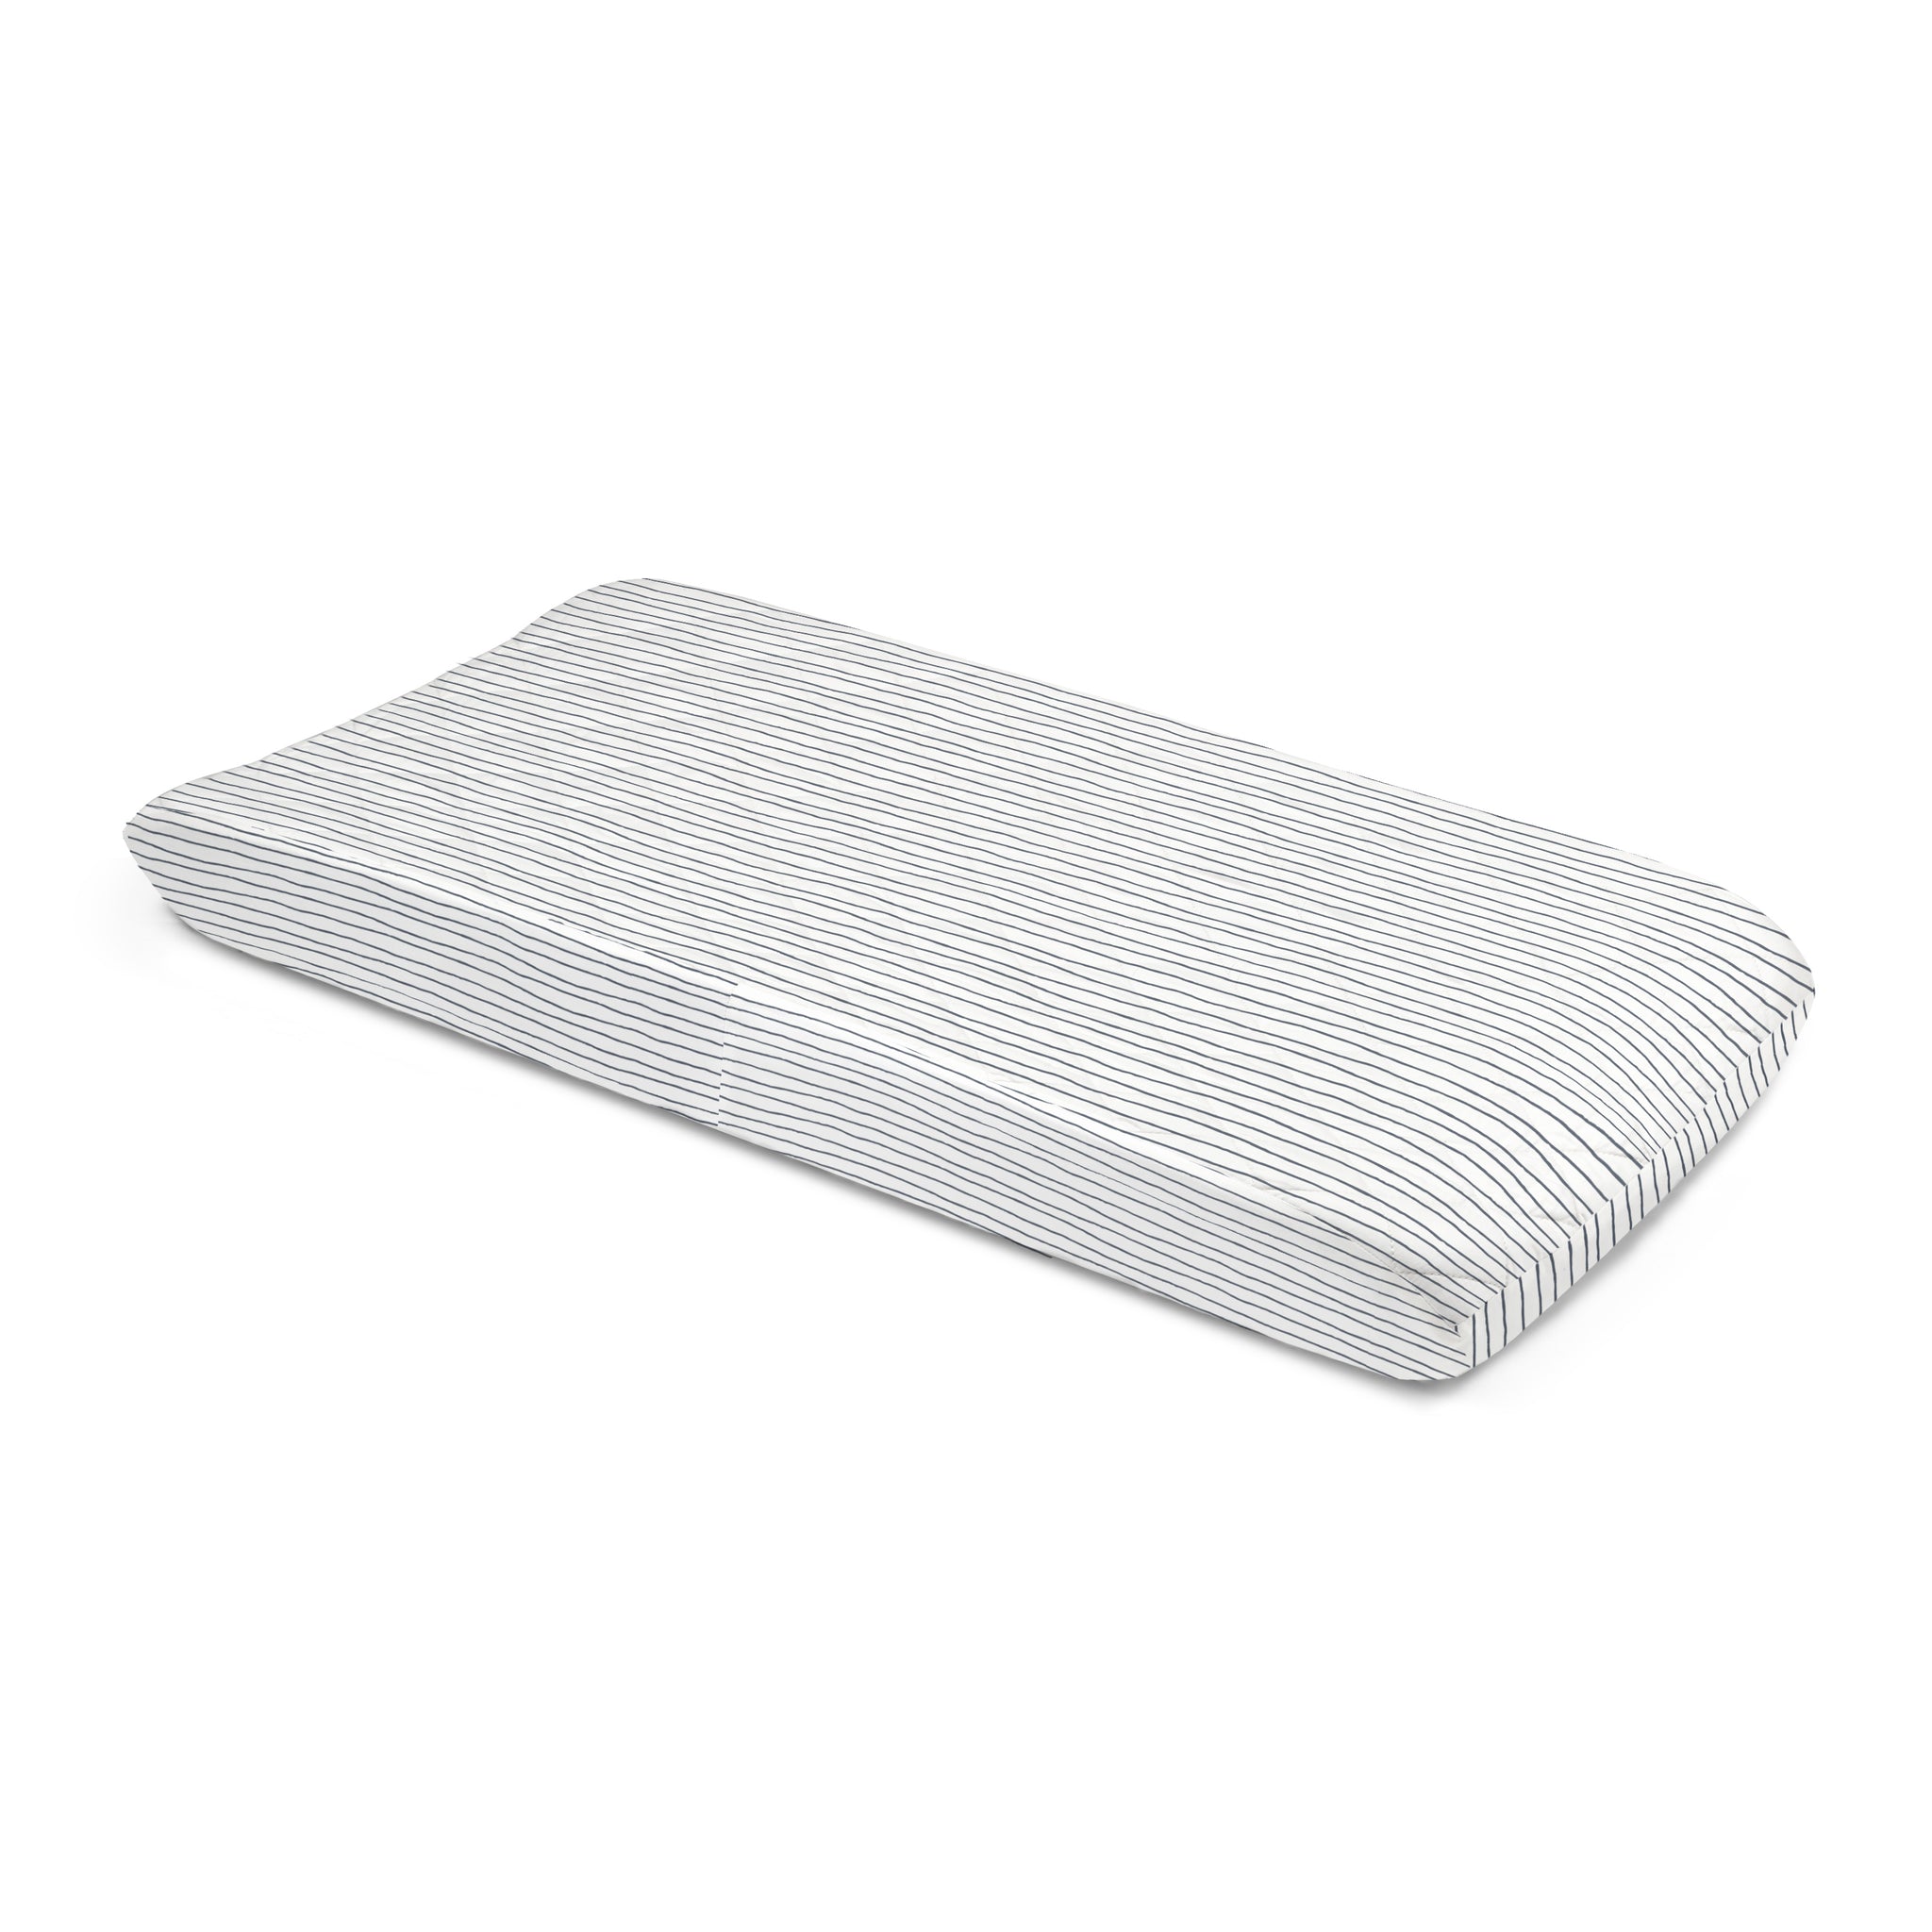 Organic Cotton Changing Pad Cover - Navy Stripes